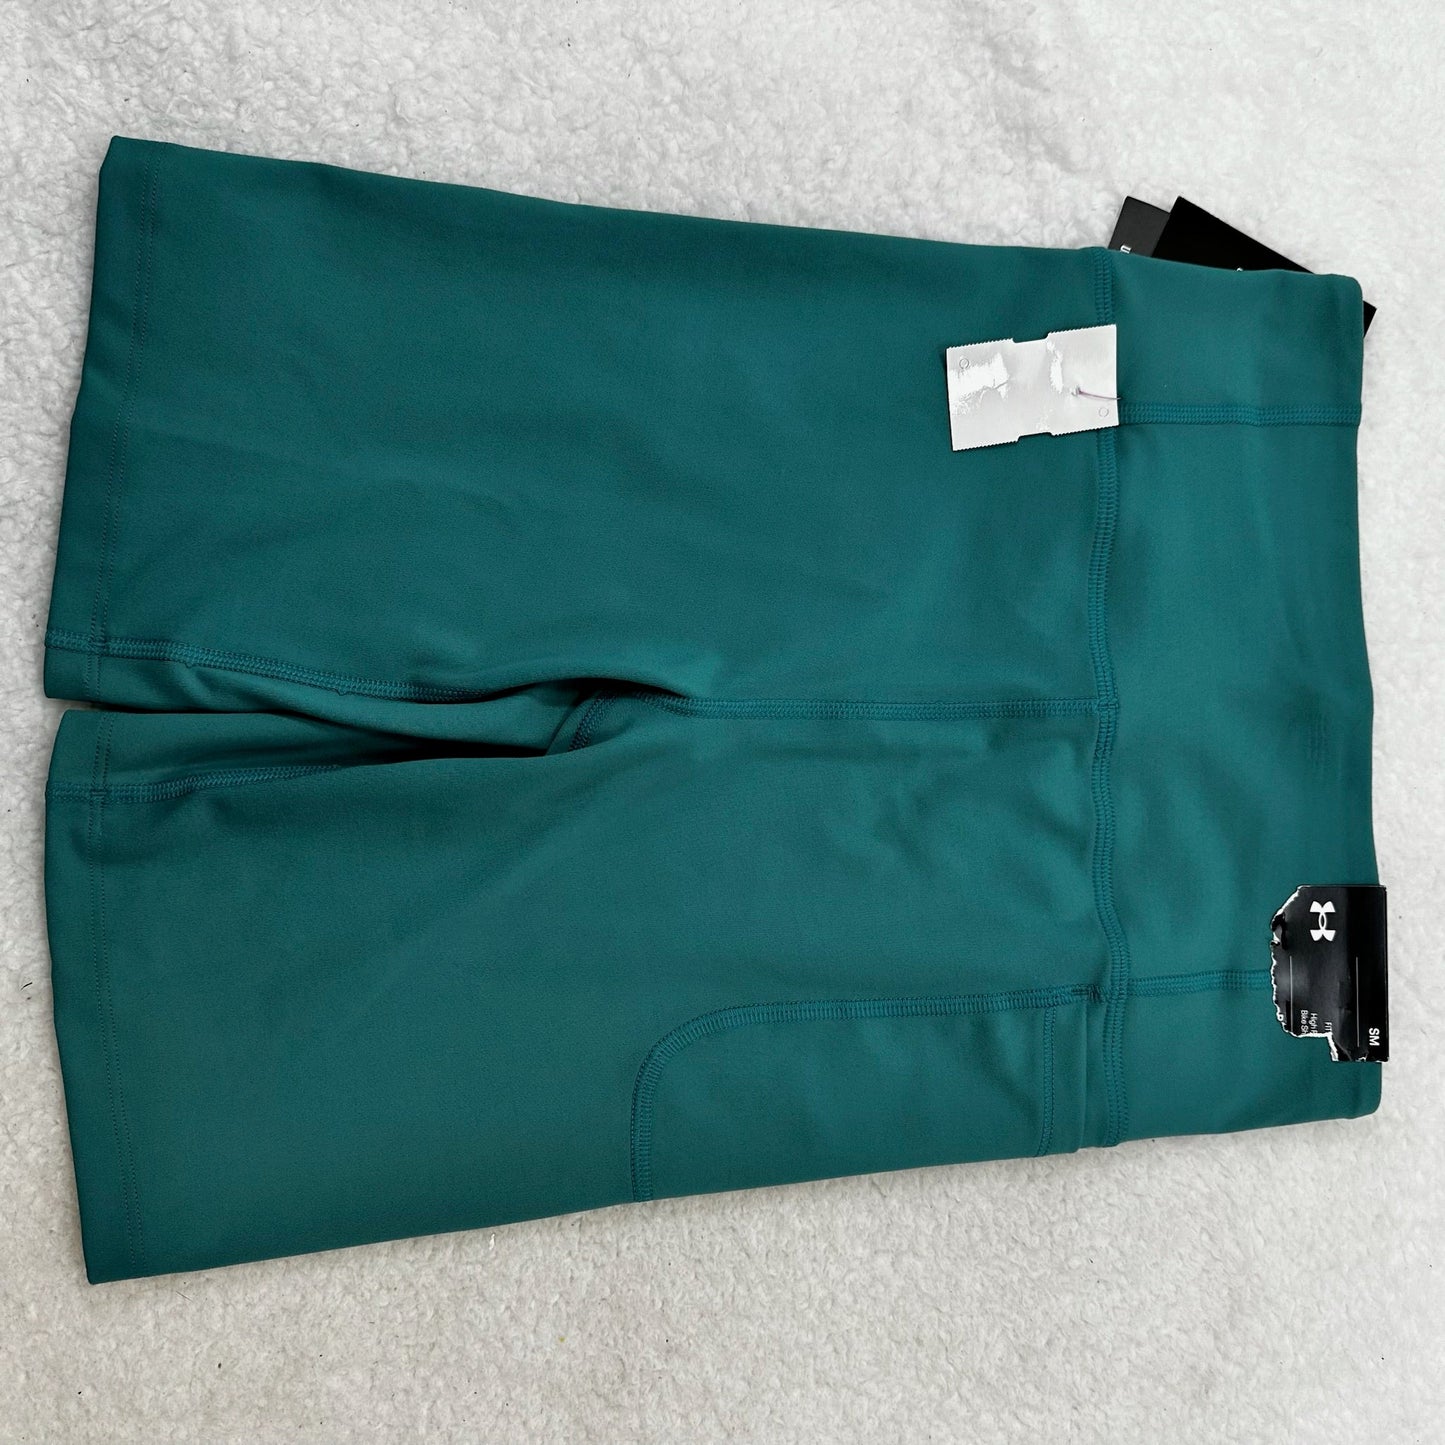 Teal Athletic Shorts Under Armour, Size S